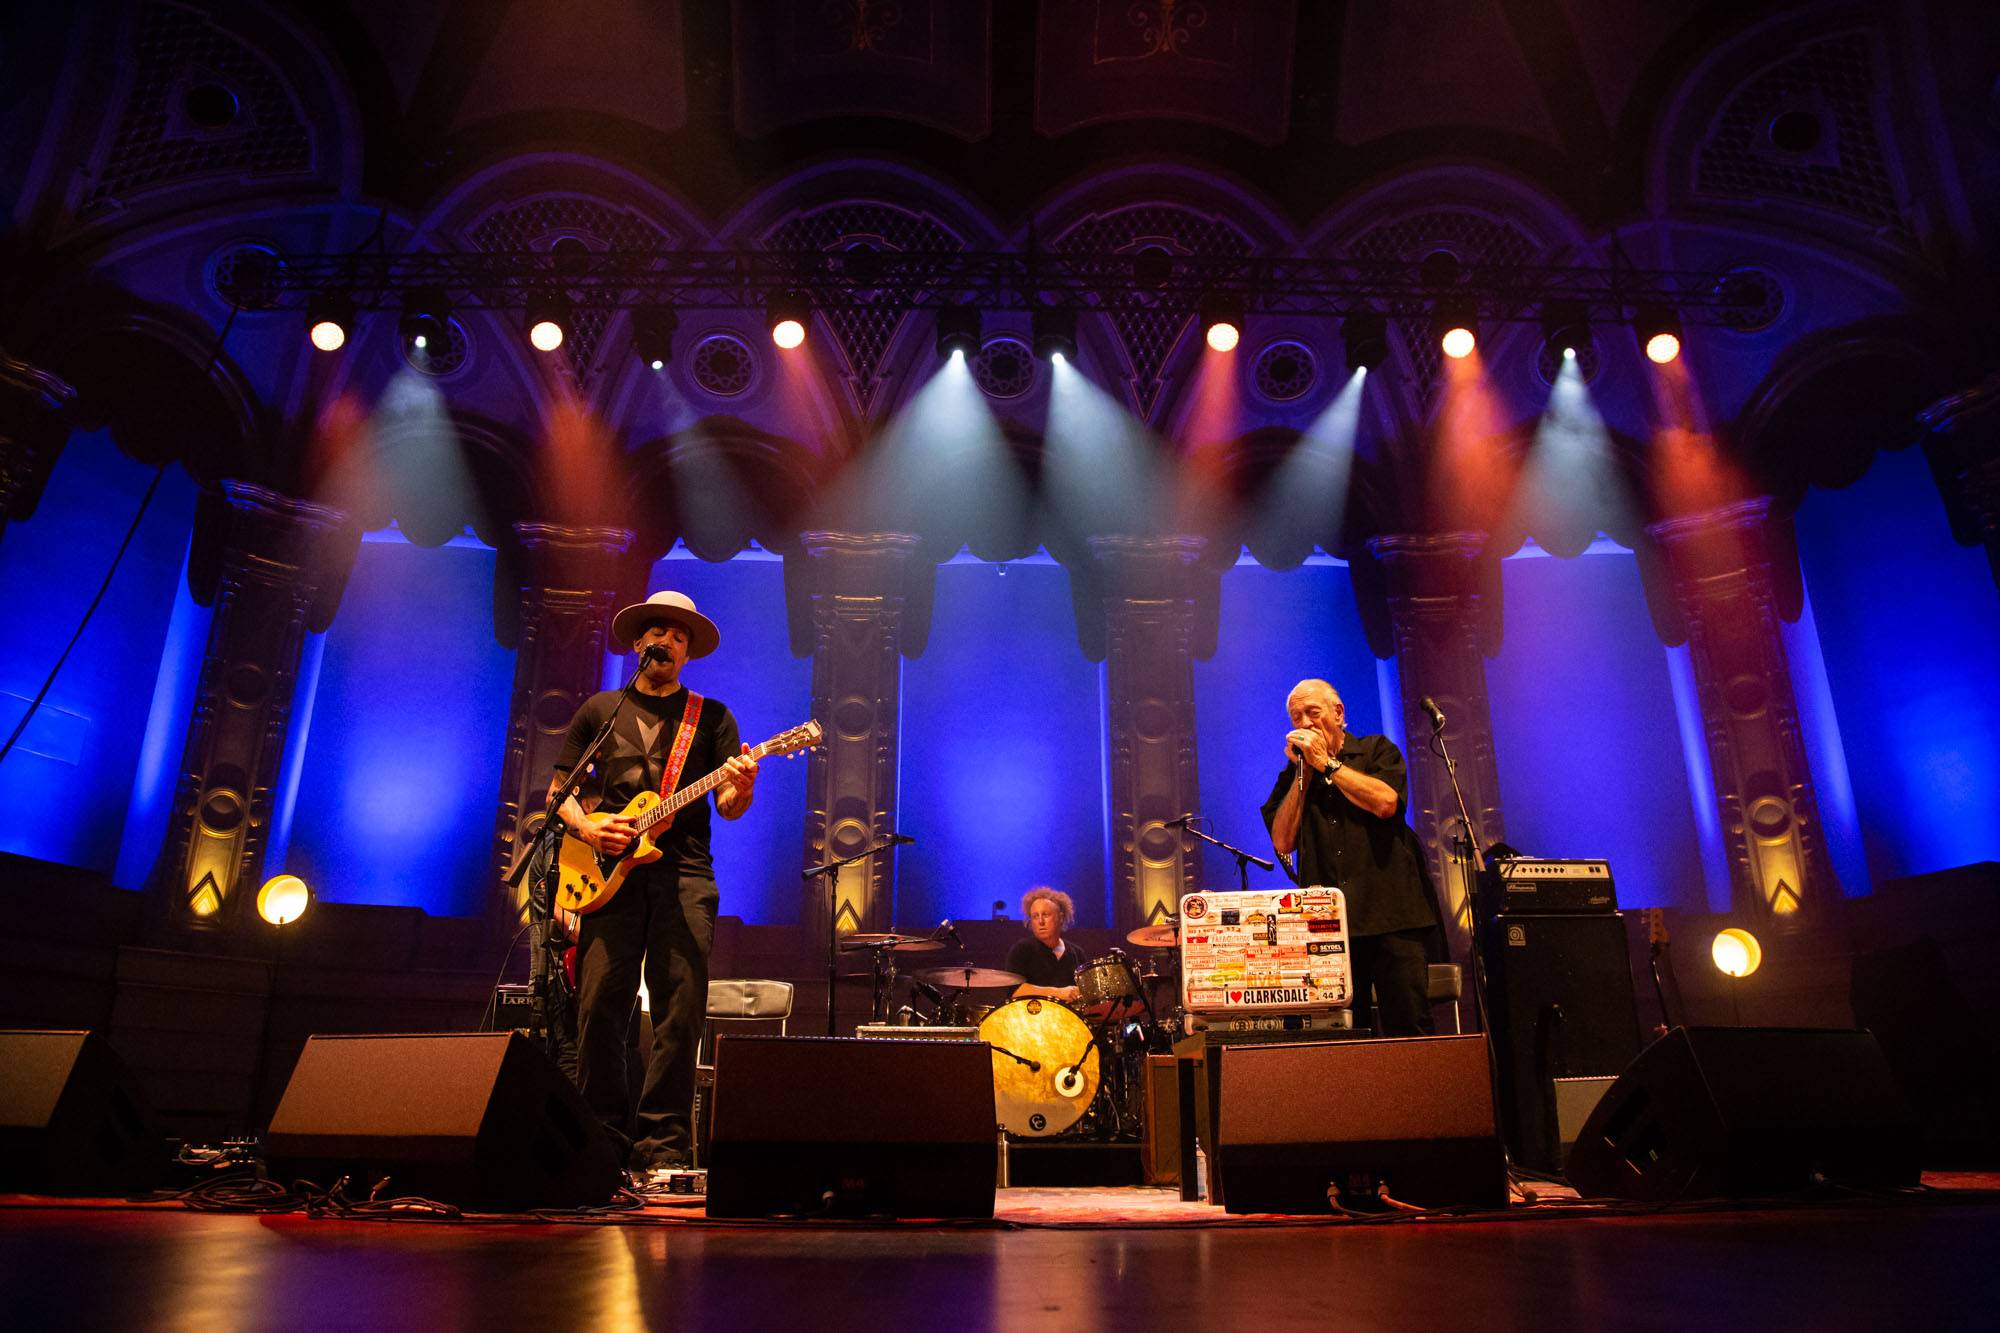 Ben Harper and Charlie Musselwhite at the Orpheum Theatre, Vancouver, Aug 23 2018. Kirk Chantraine photo.